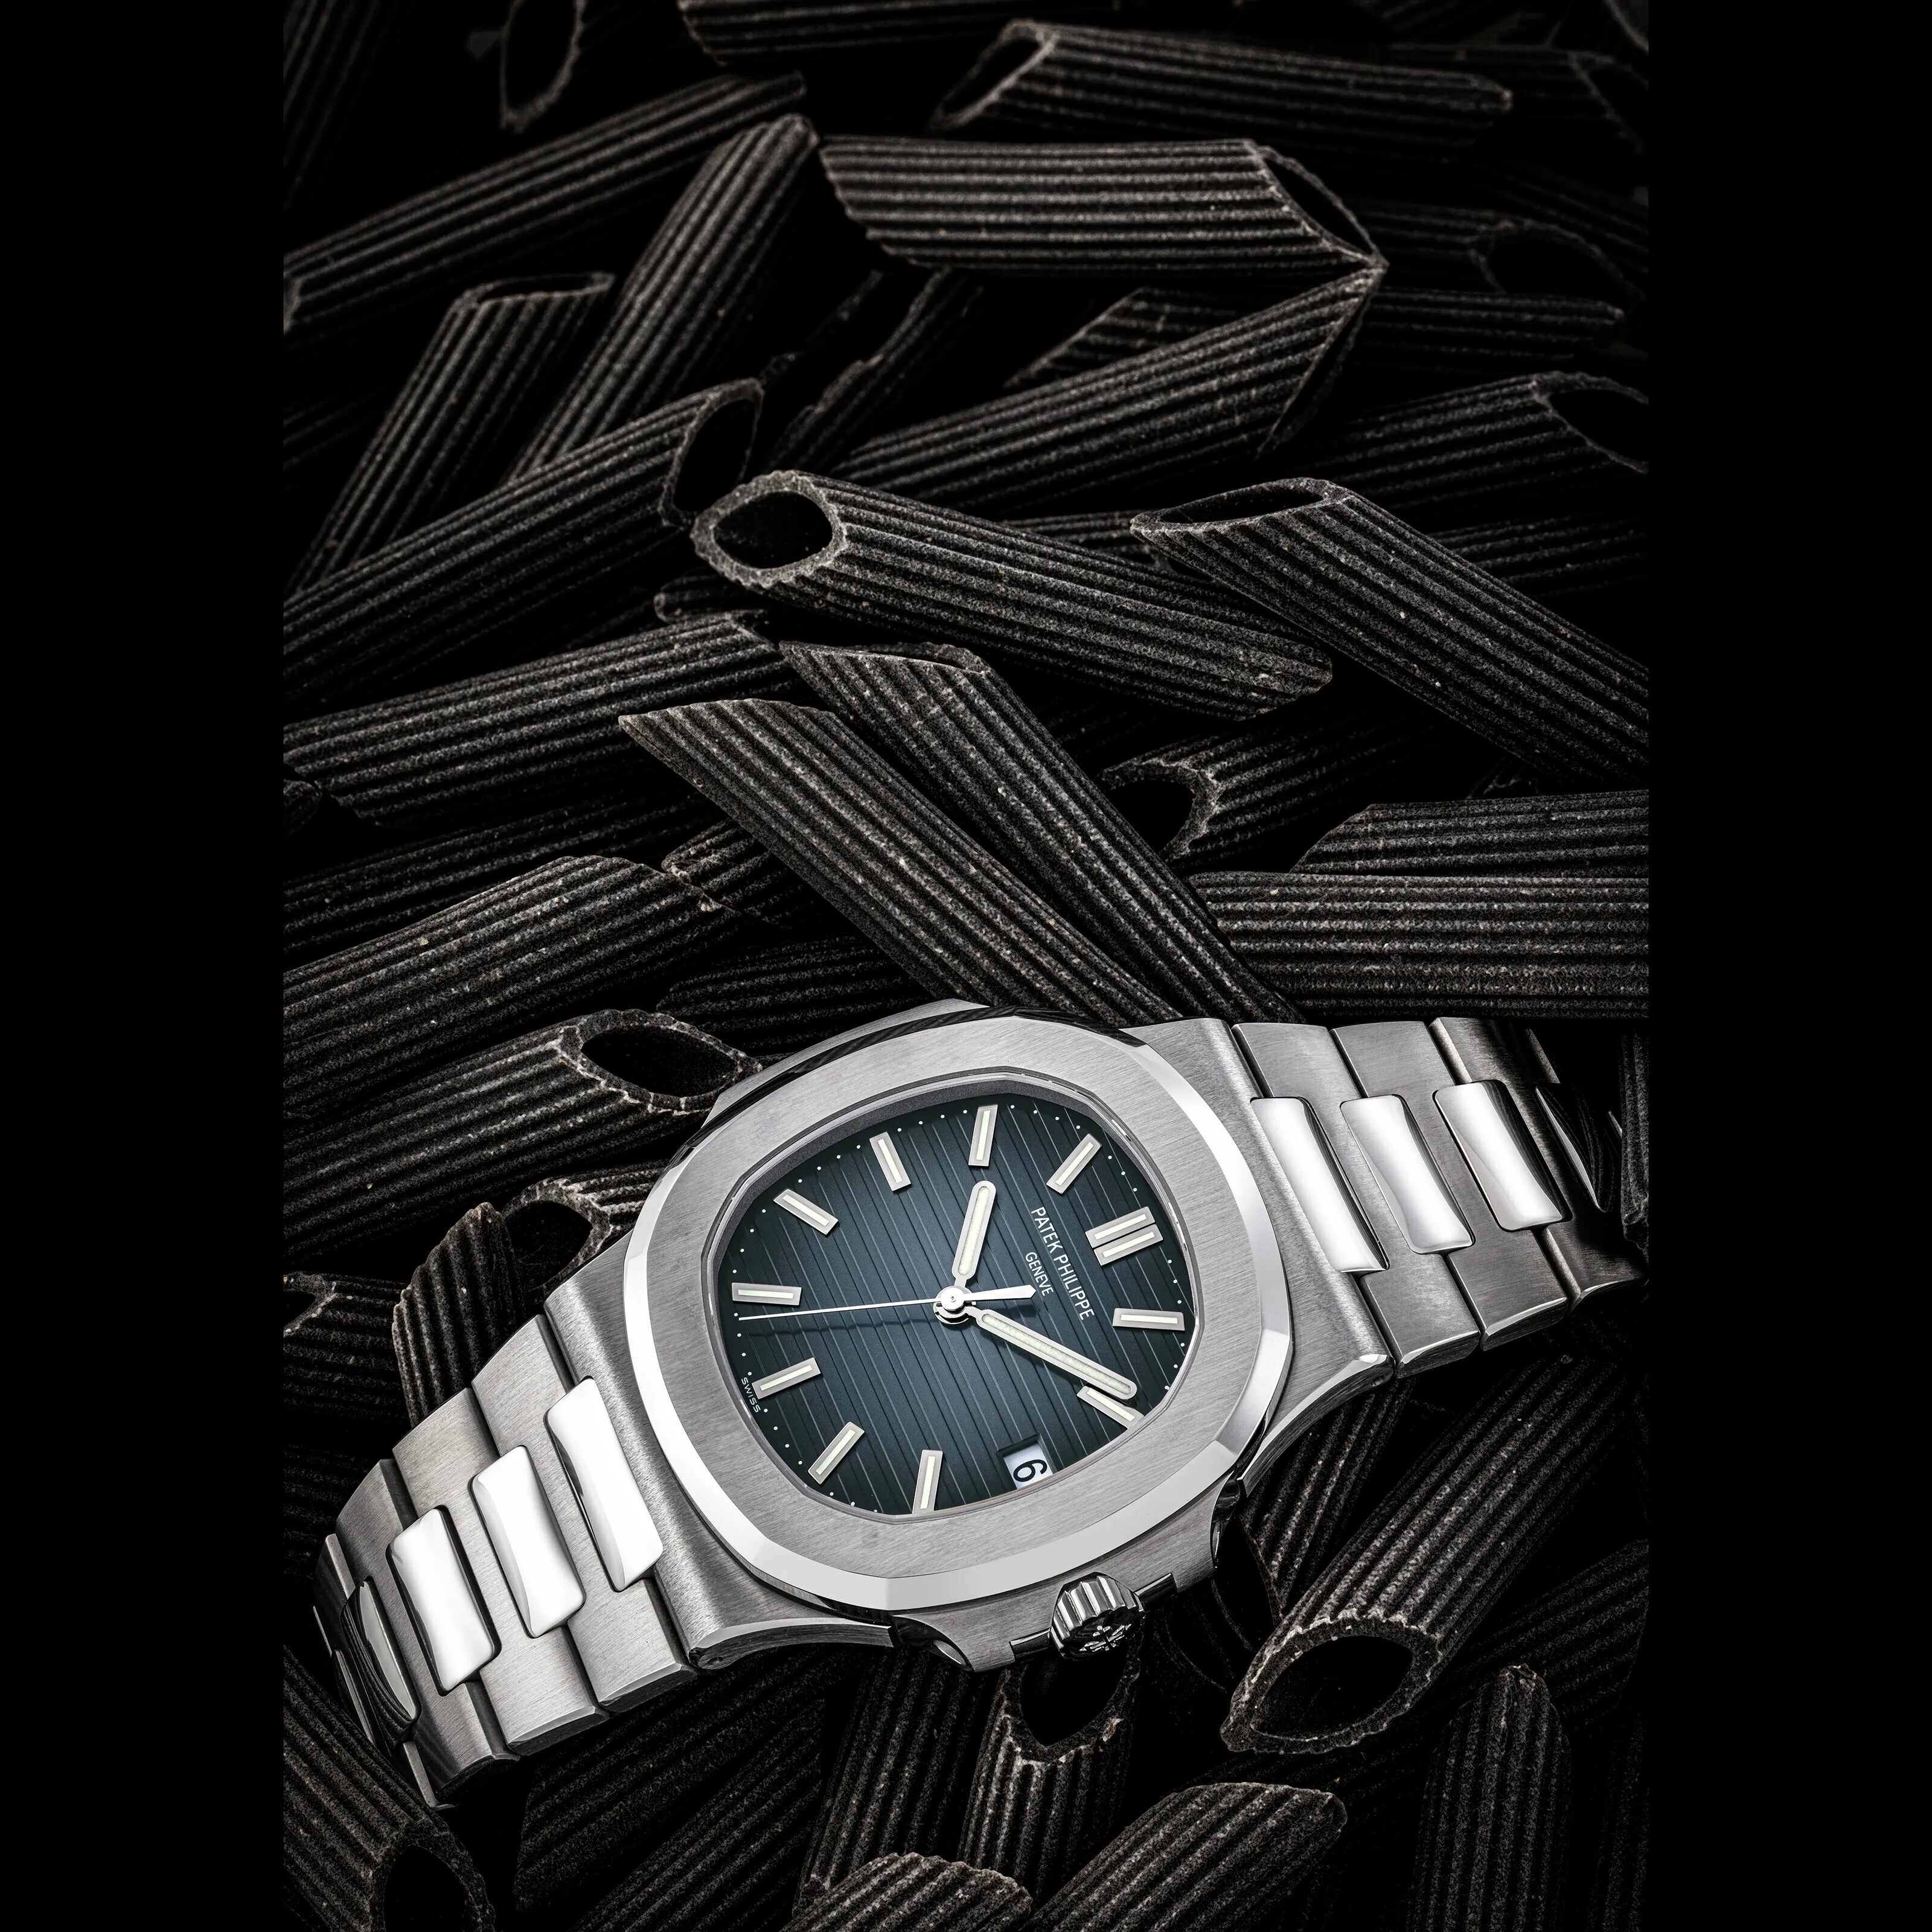 Patek Philippe Nautilus 5711/1A-010 40mm Stainless steel Grey-blue